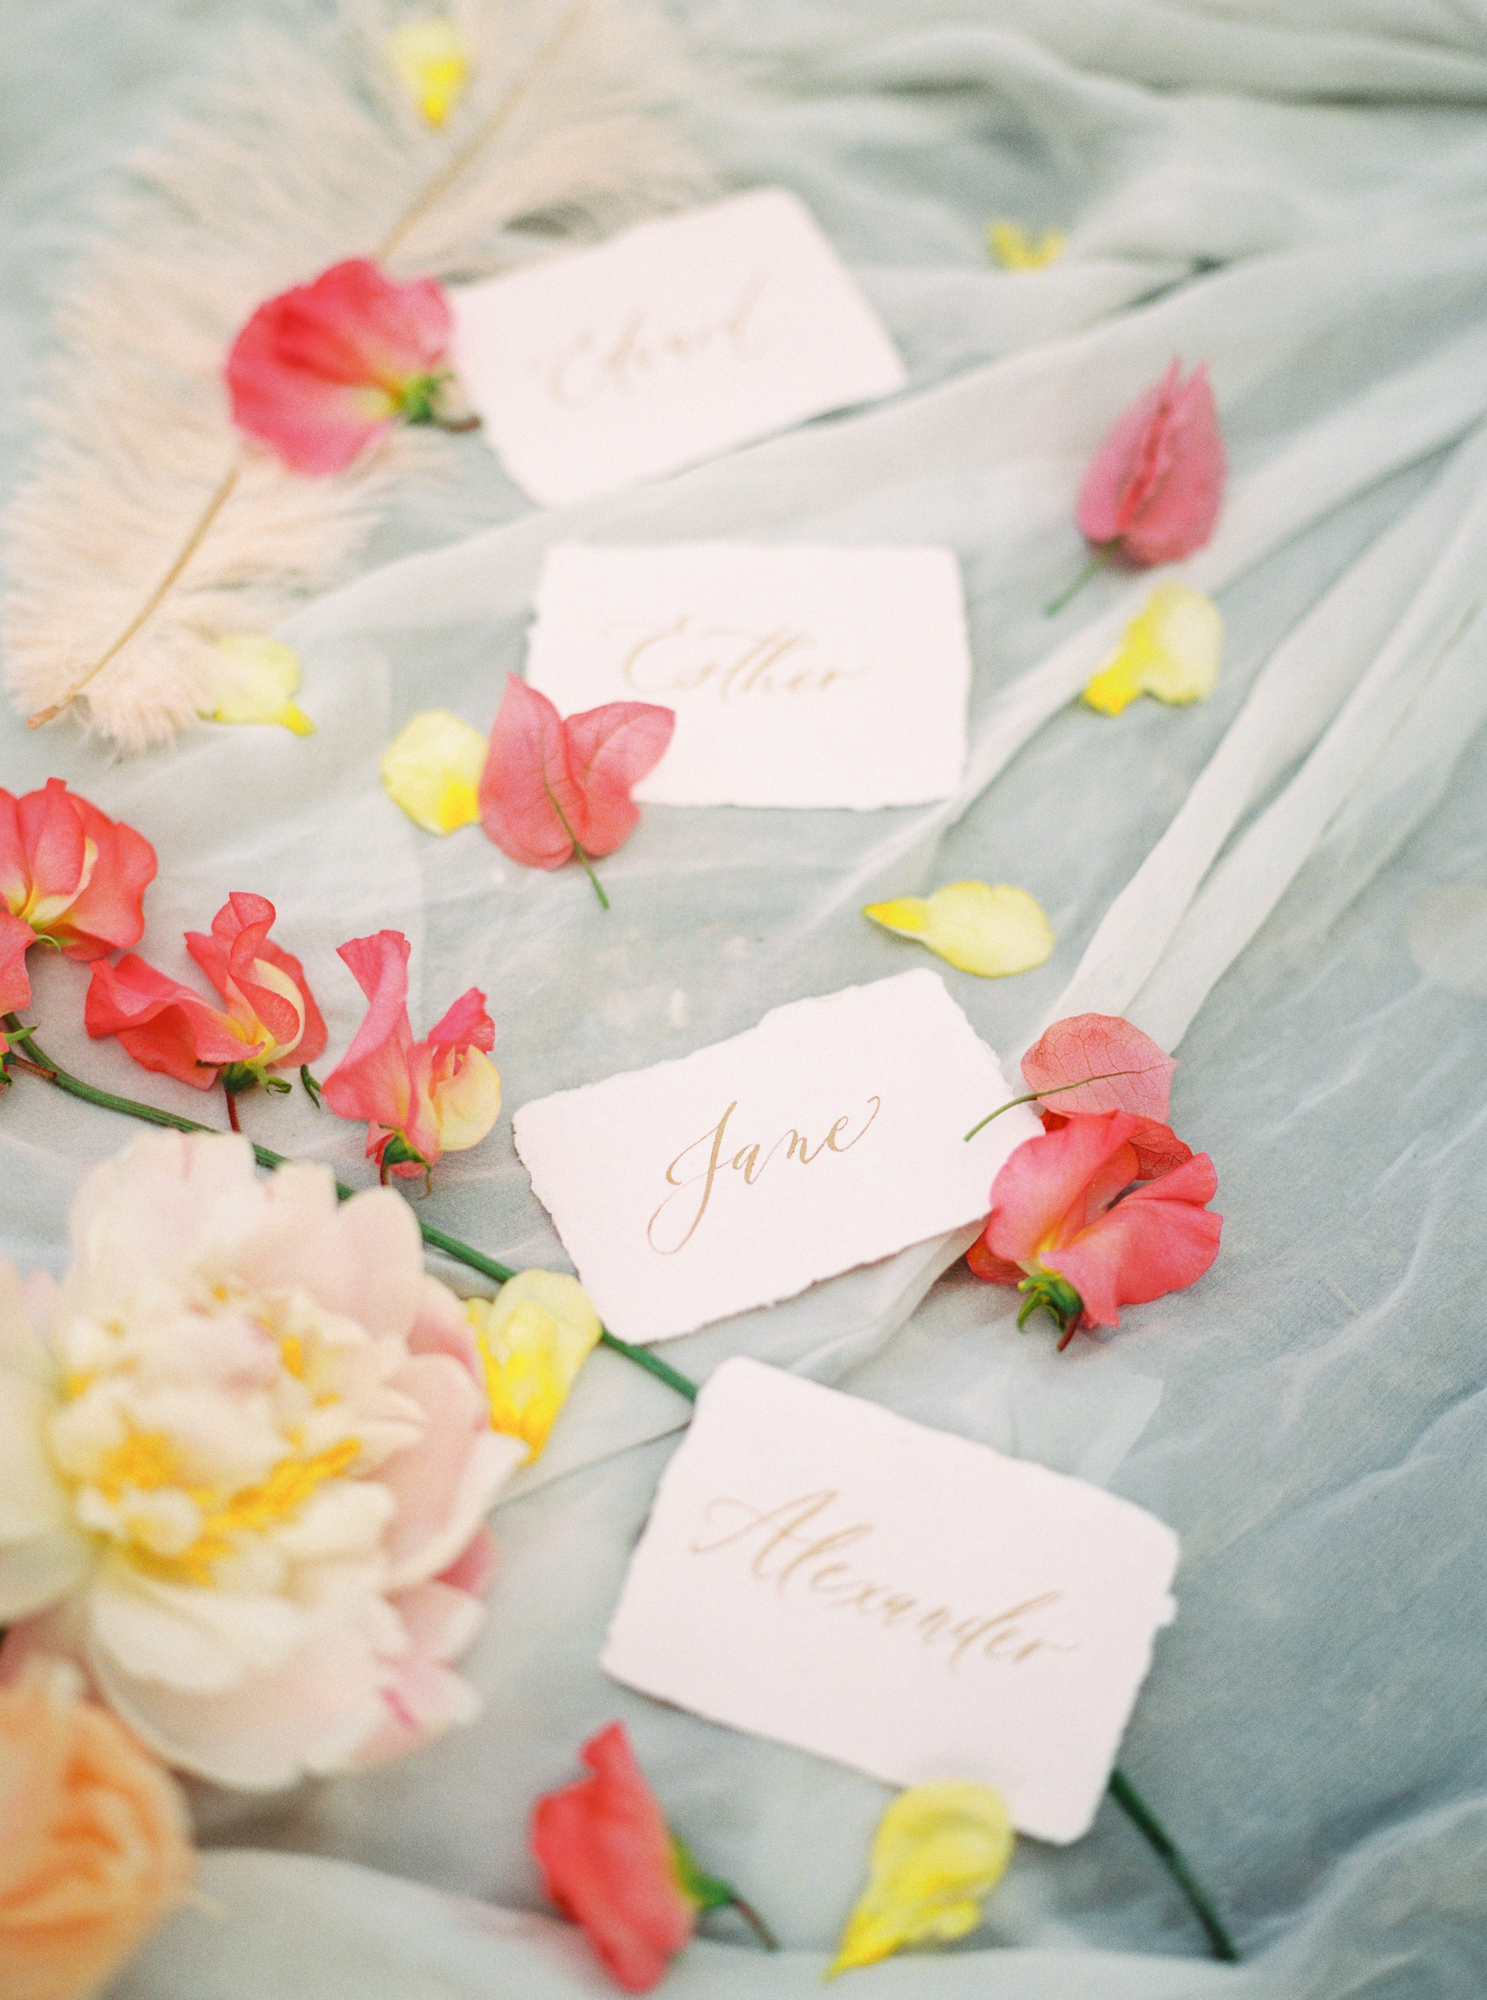 travellur_photoshoot__summer_in_versailles_wedding_flowers_bridal_luxe_shoot_floral_france_isibeal_studio_stationery_dominique_alba_caligraphy.jpg